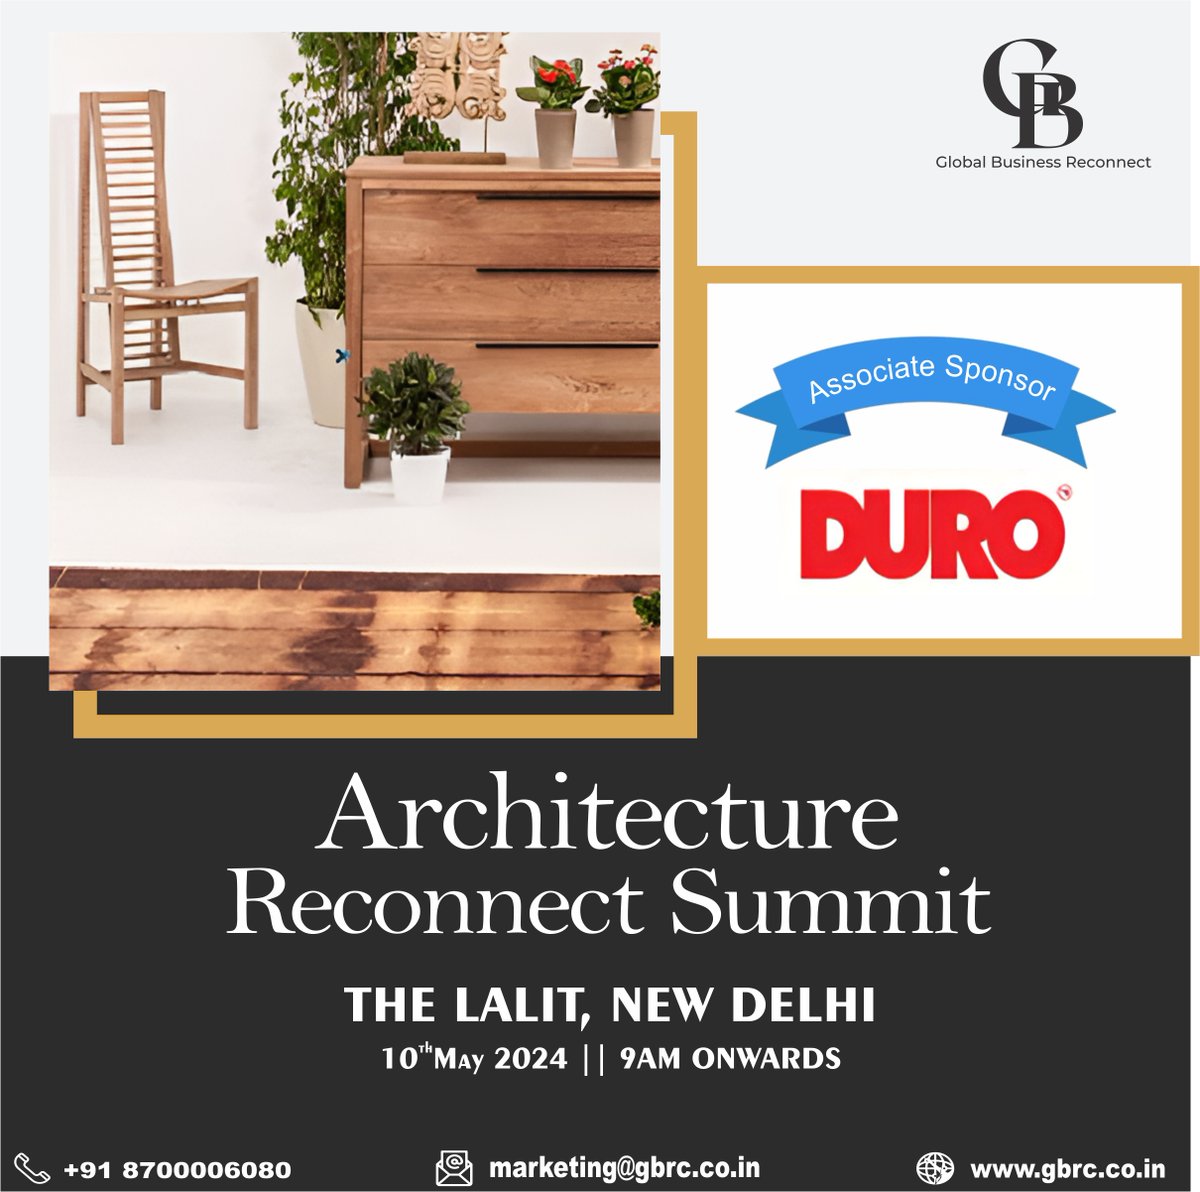 We're absolutely delighted to welcome @Duroply  onboard as our Associate Sponsor for the Architecture Reconnect Summit which is going to happen on 10th May, 2024 at The Lalit, New Delhi
Together, we're poised to create unforgettable experiences

#architecturereconnectsummit #GBRC